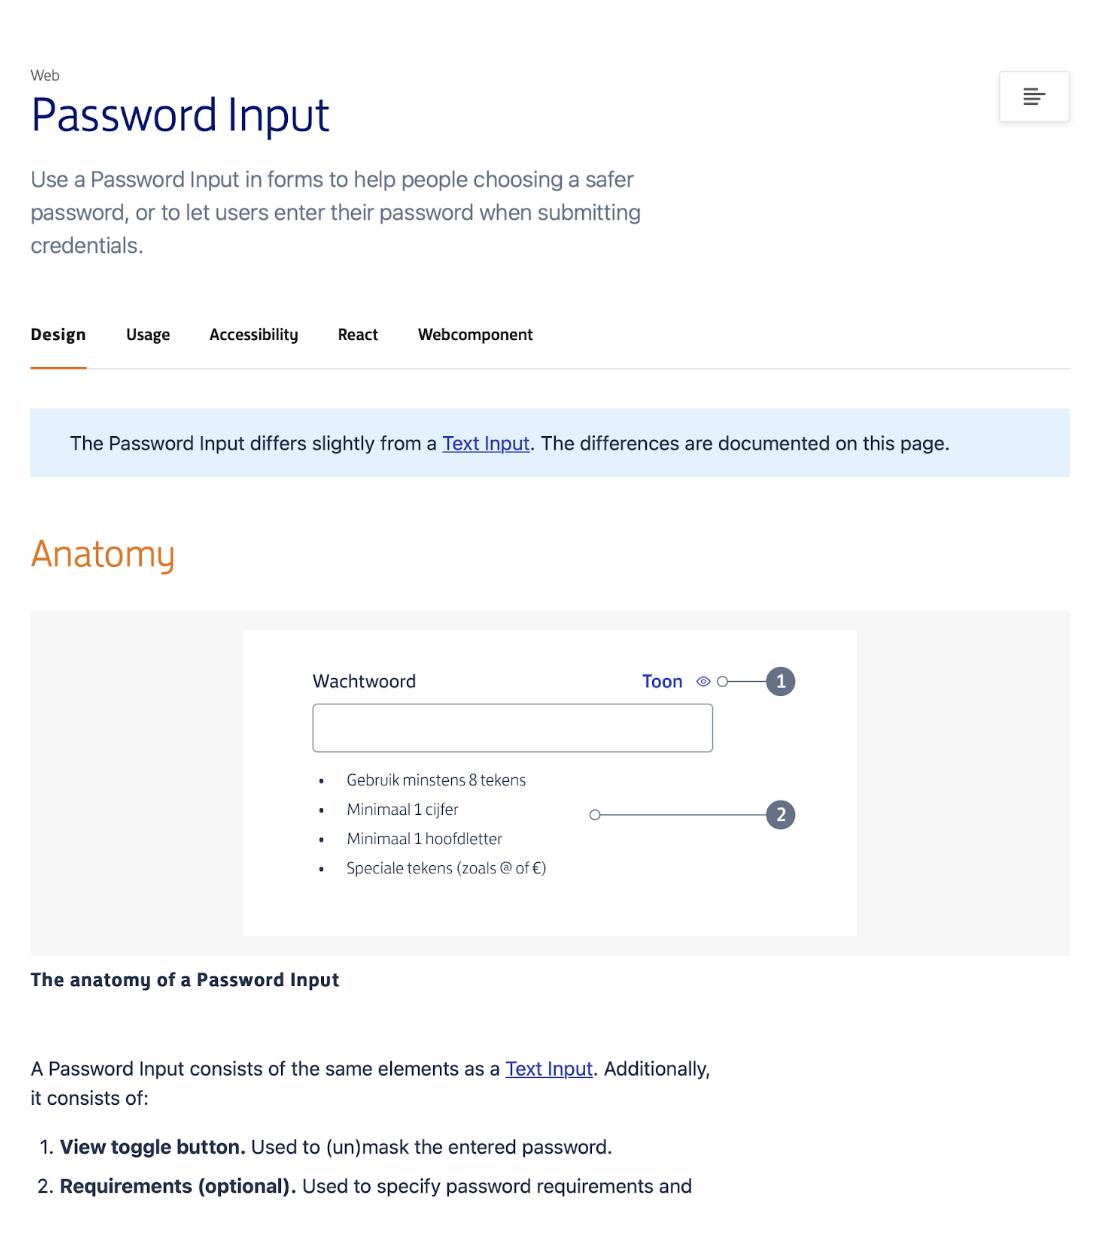 Password Input - use a password input in forms to help people coosing a safer password, or let users enter their password when submitting credentials. Design: the anatomy of a password input. A password input consists of the same elements as a text input. Additionally it conssitens of view toggle button and requirements (optinal).